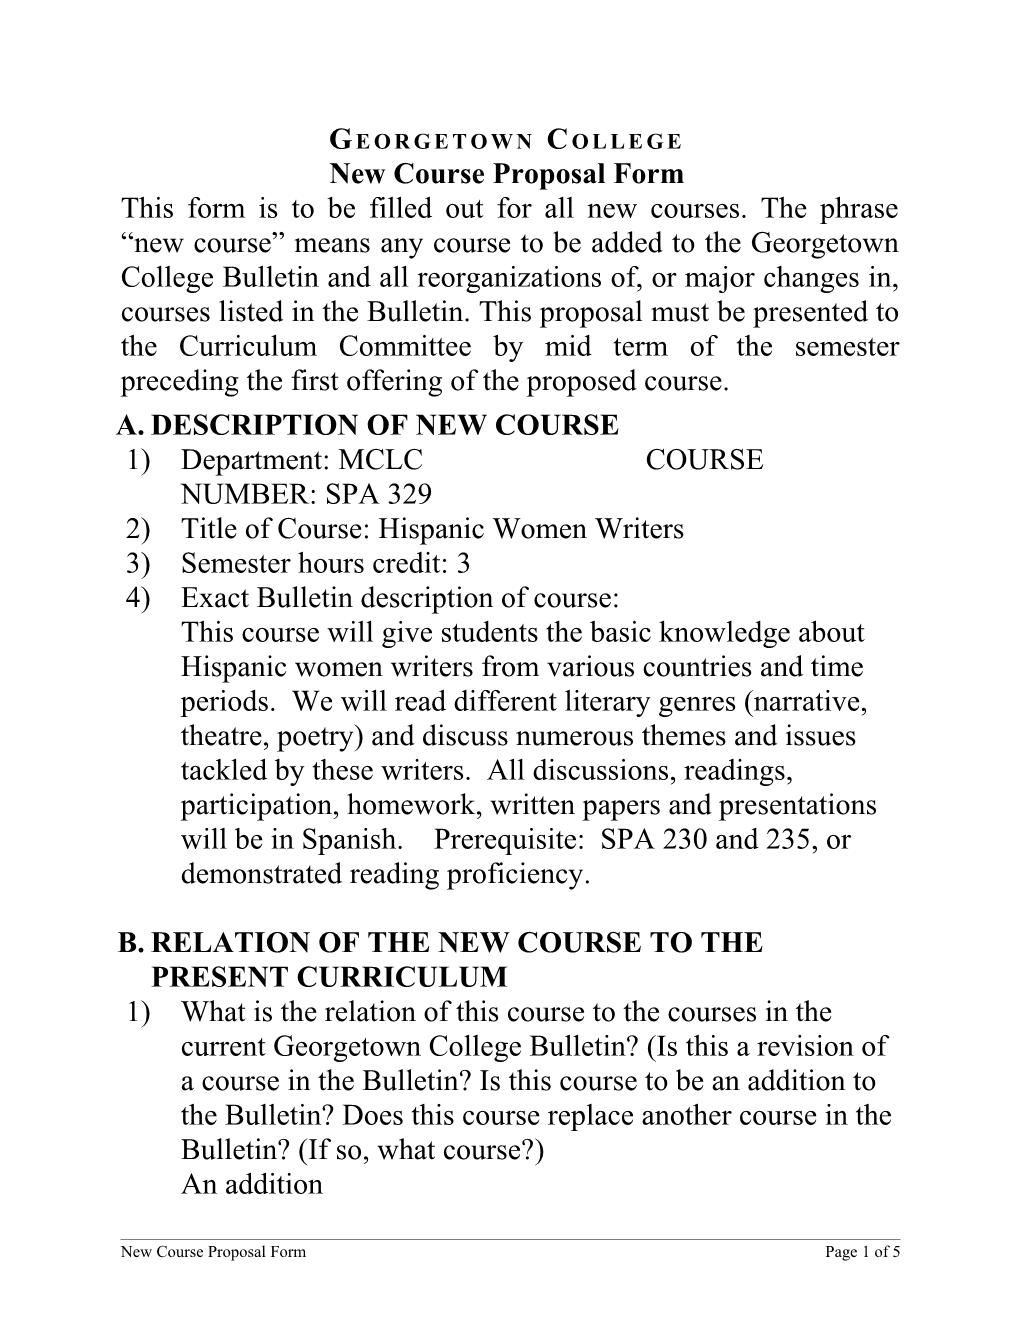 New Course Proposal Form s2